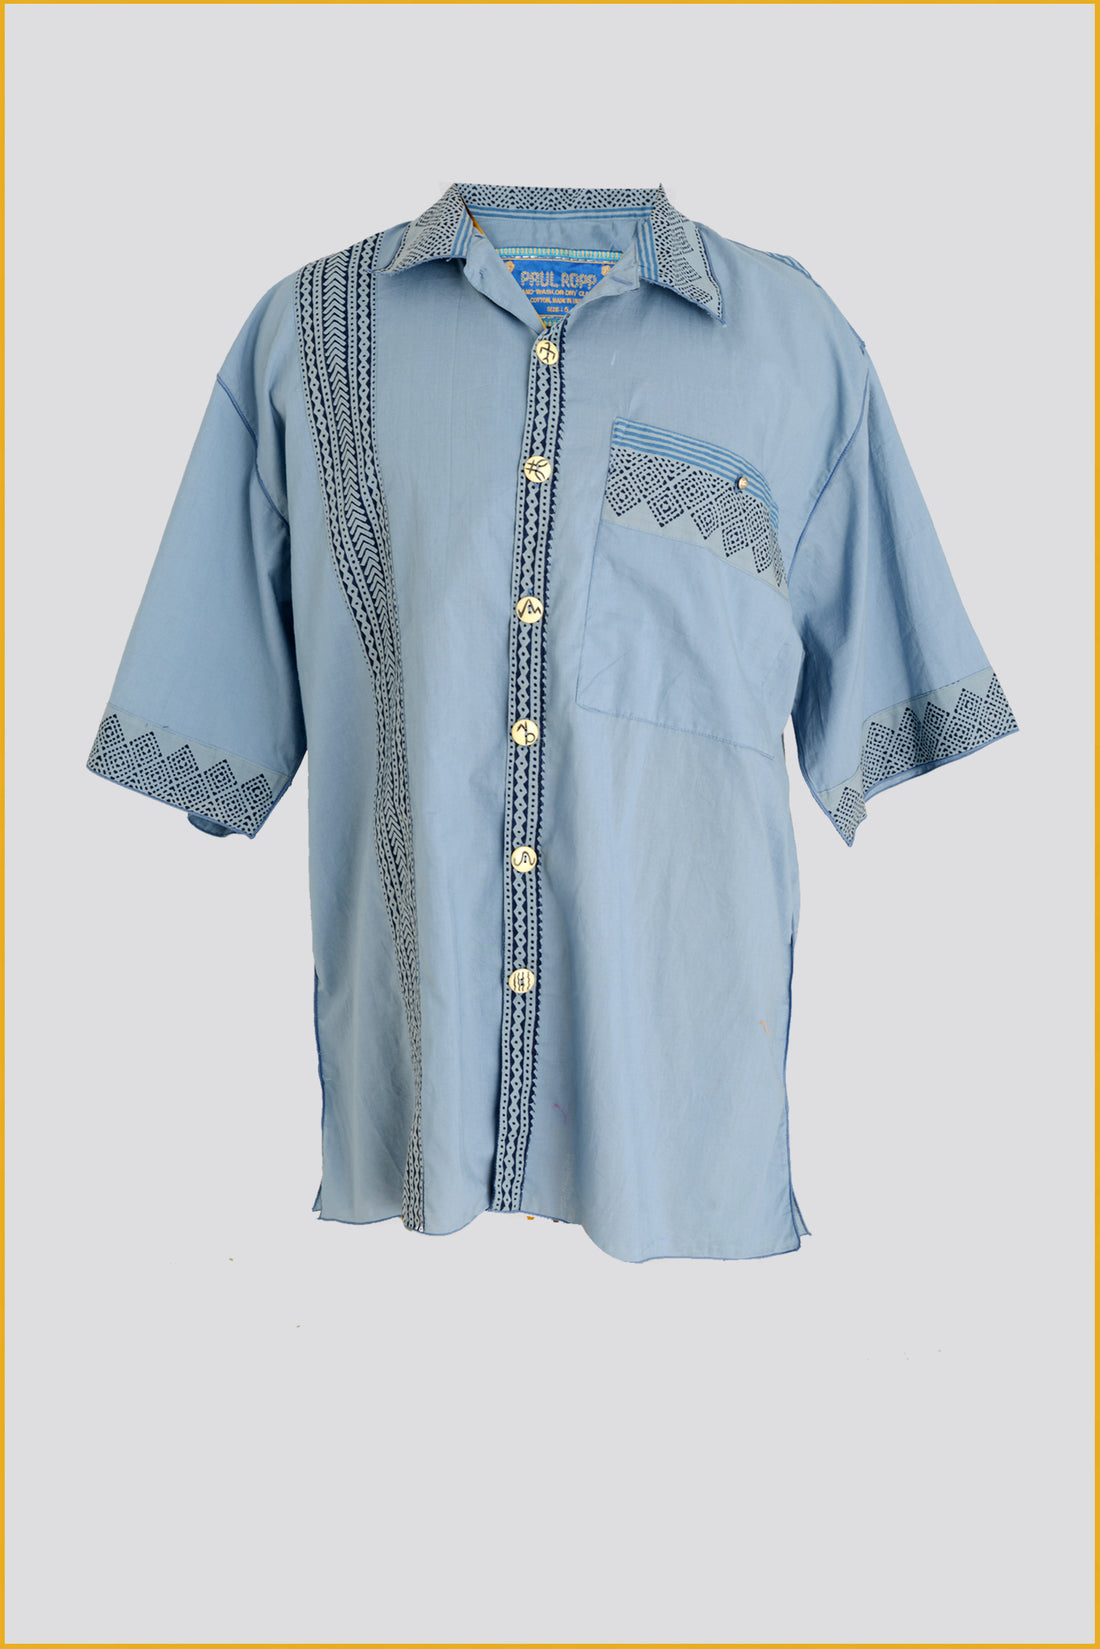 Edgar - Cotton Voile Block Print Shirt with Hand Carved Bone Buttons (7424846266564)